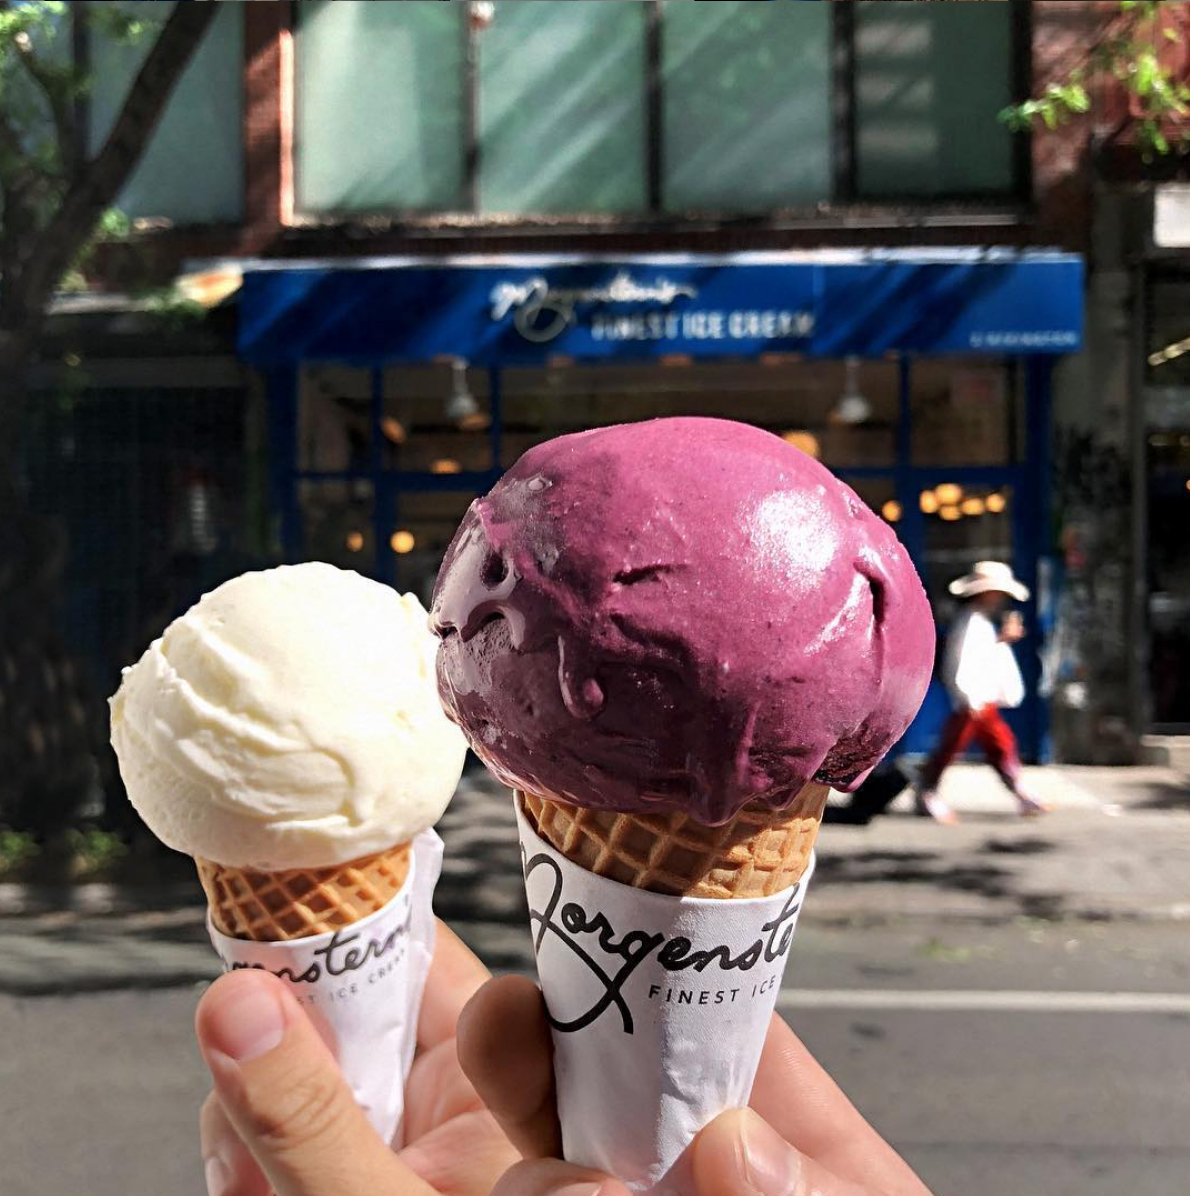 Blueberry Chocolate and Raw Milk – From Instagram _morgensternsnyc_